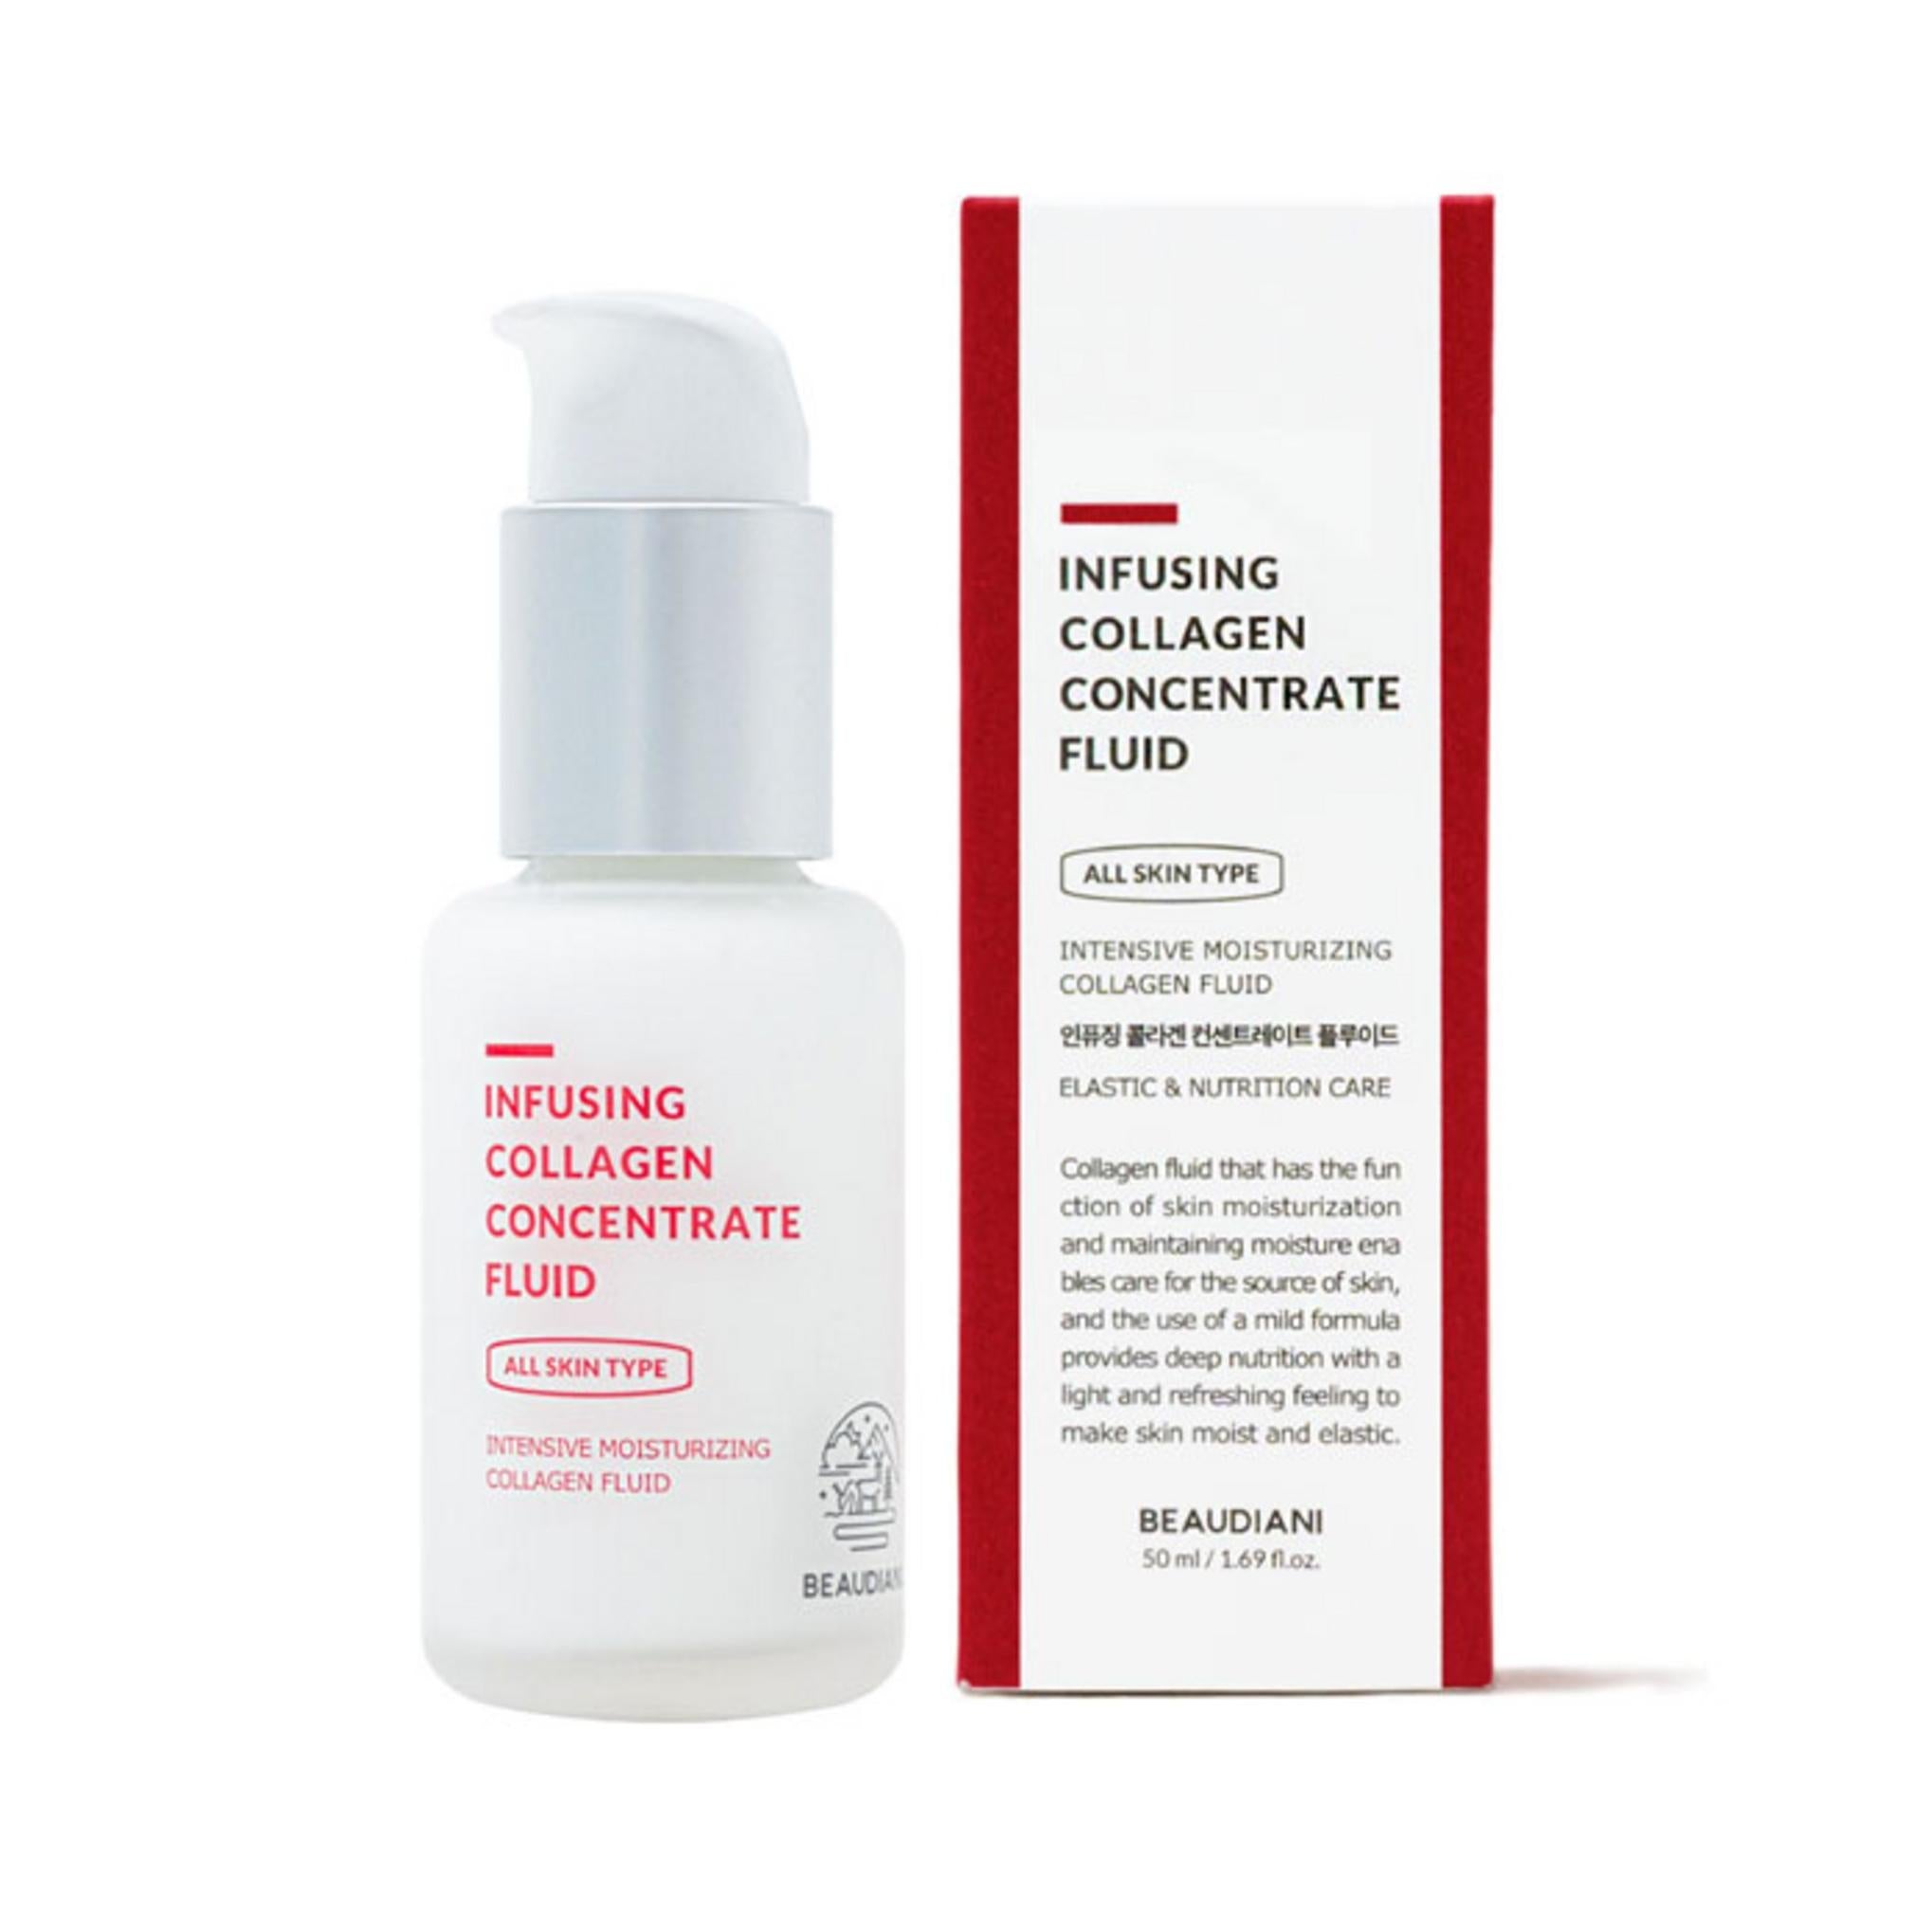 Beaudiani Infusing Collagen Concentrate Fluid